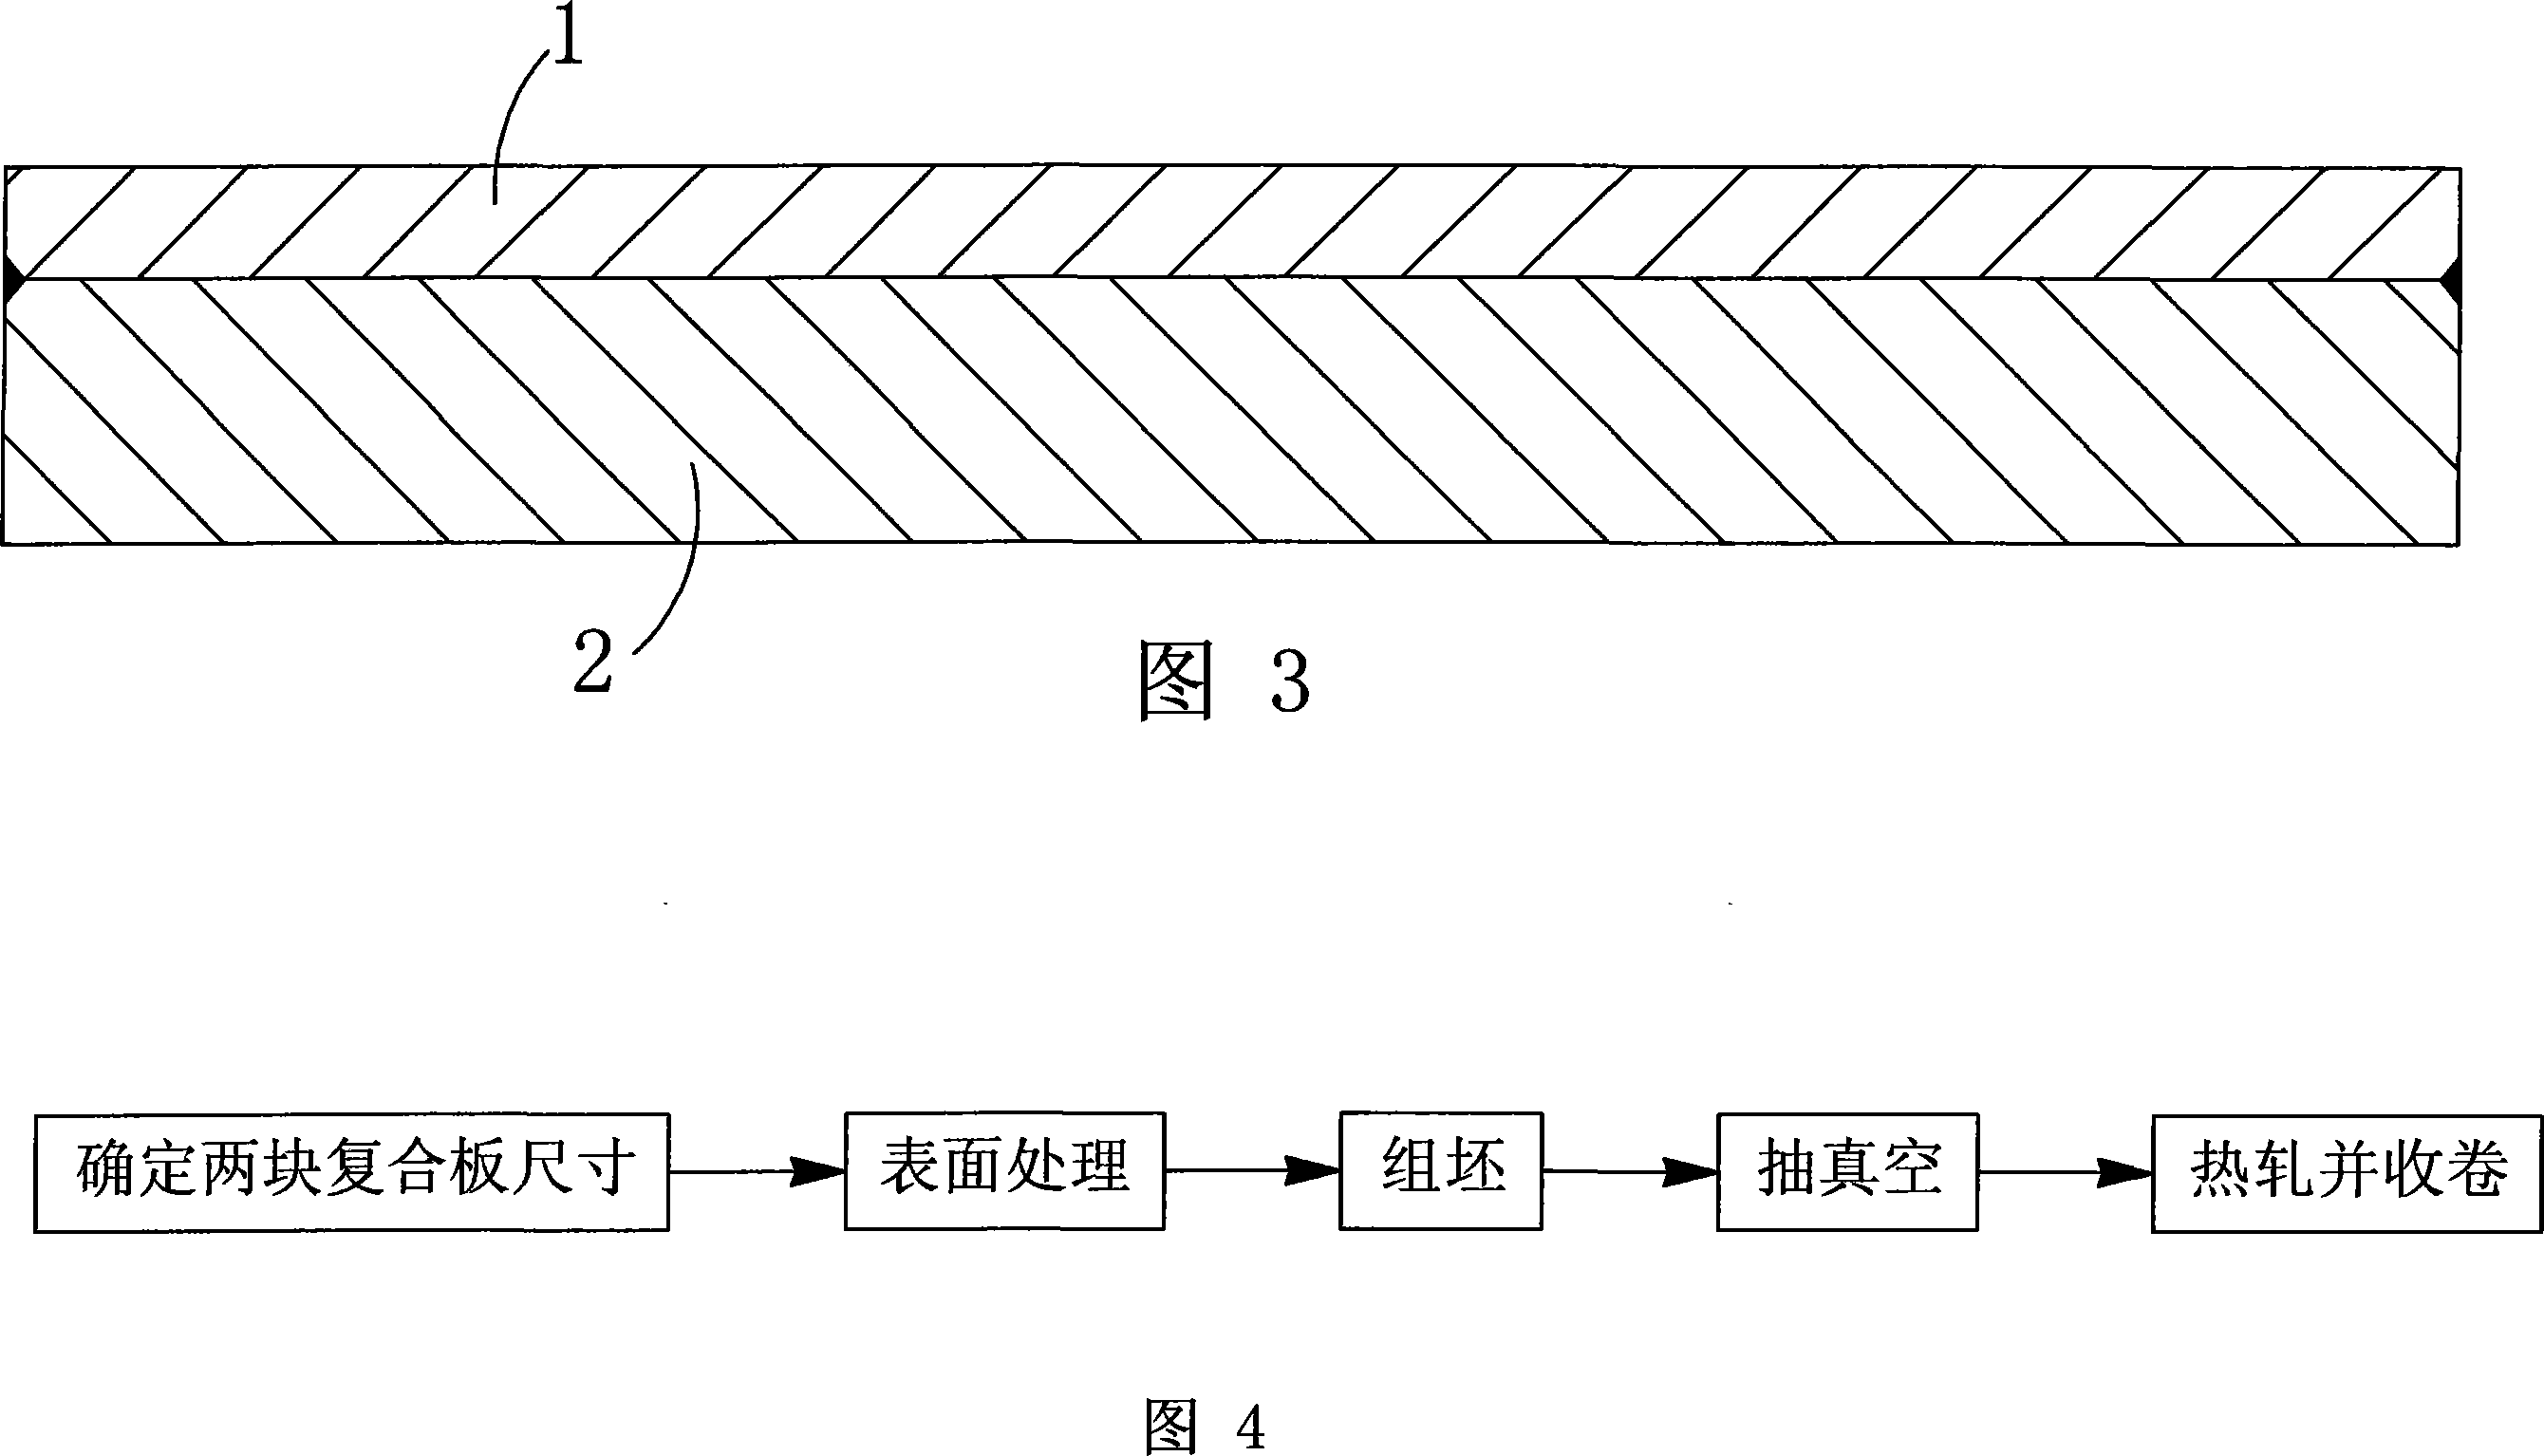 Double-layer stainless steel composite thin plate and its processing method